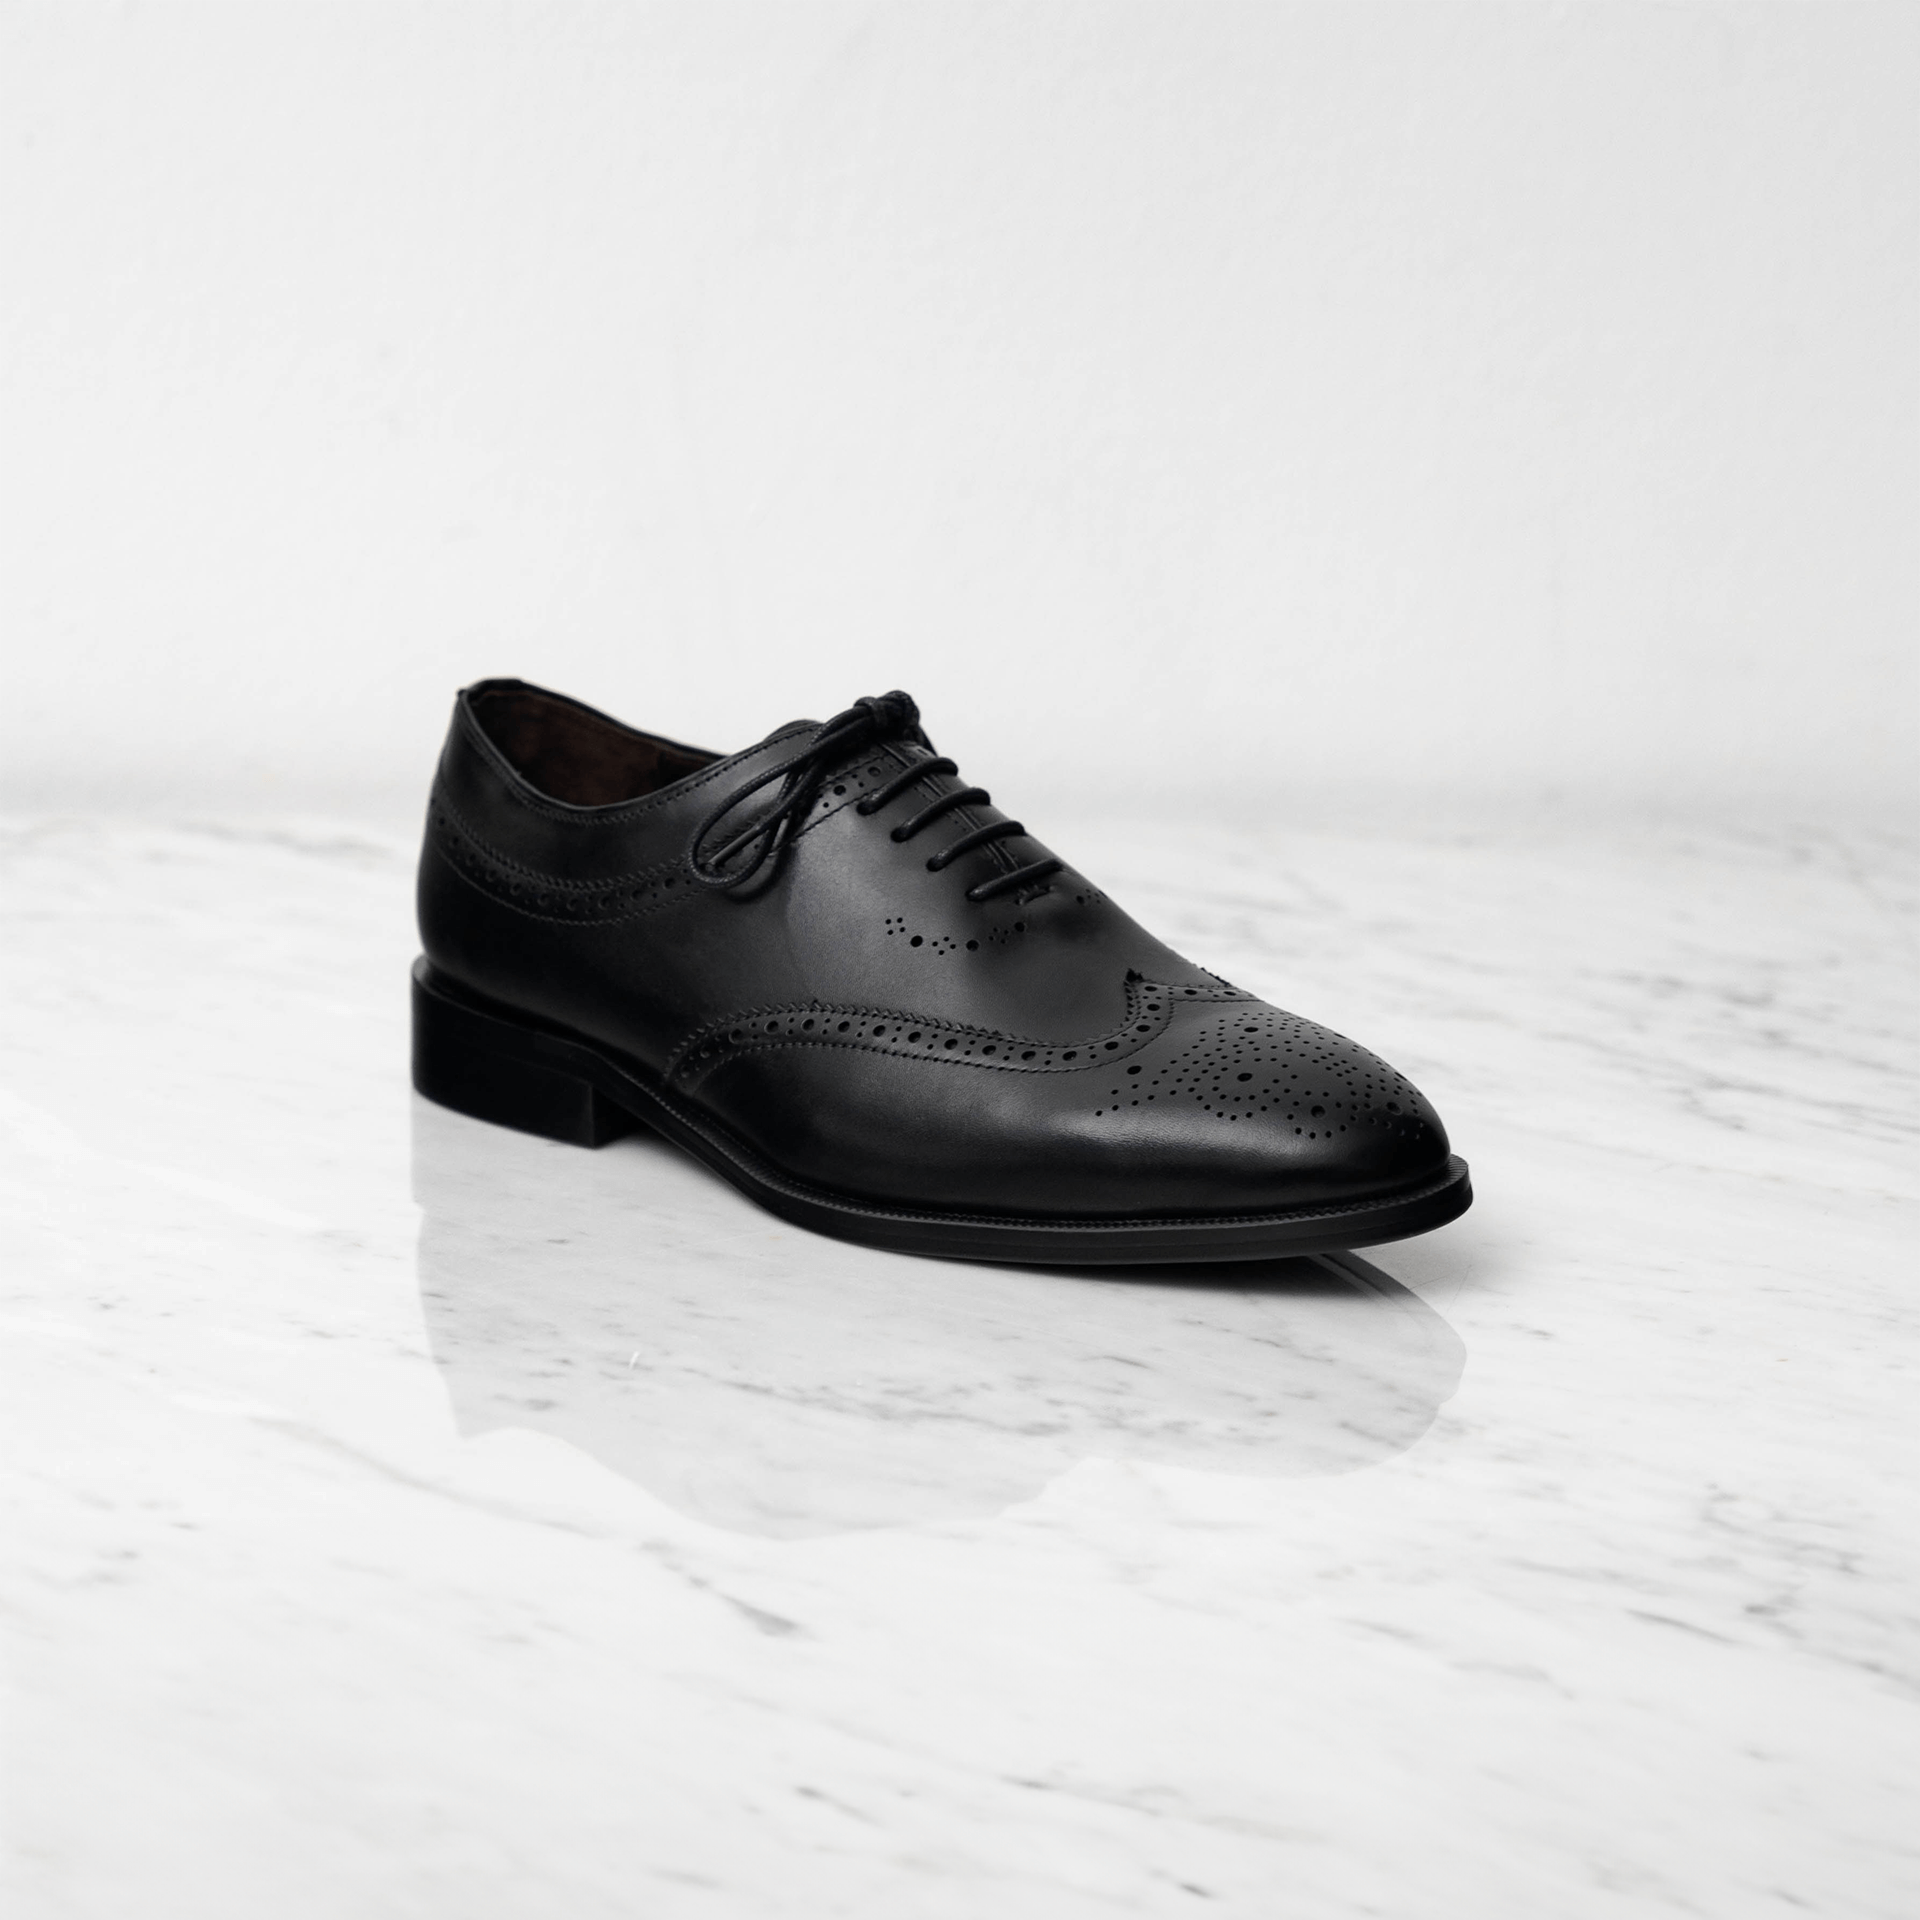 Long wing tip oxford